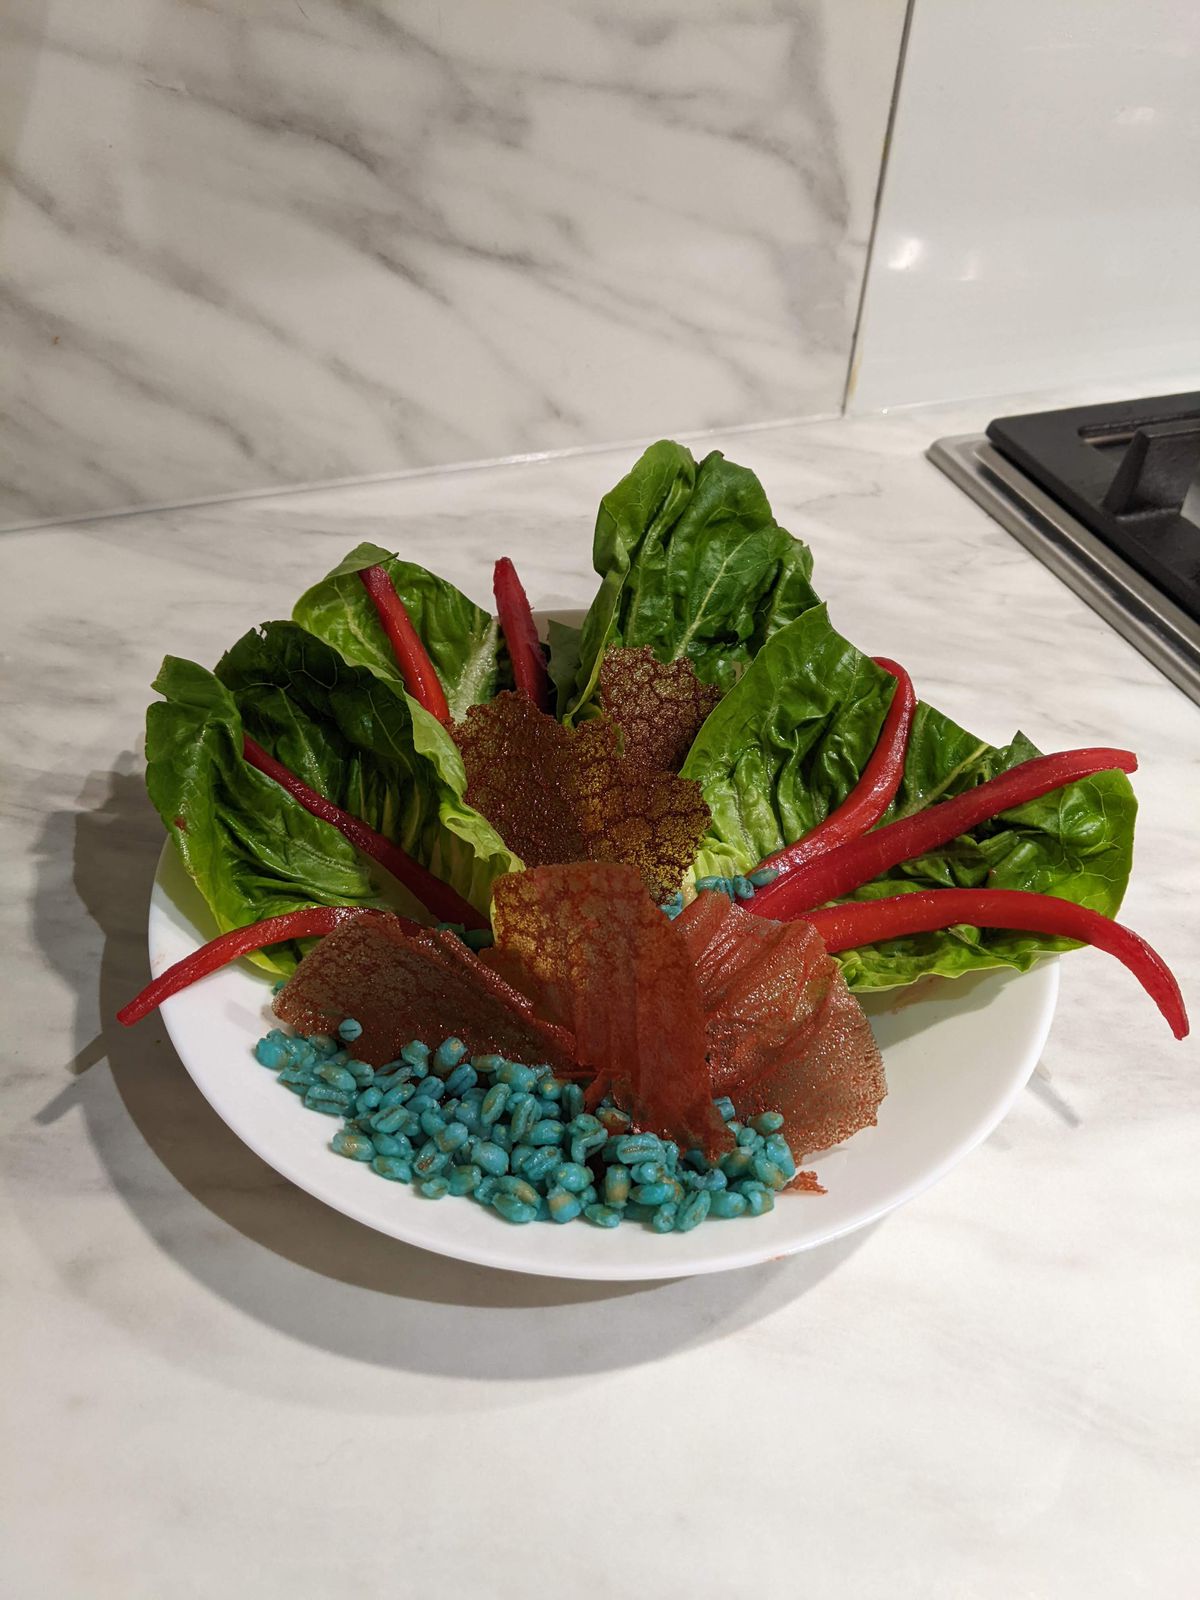 A salad on a plate with leafy greens, red-dyed carrots, and a small pile of blue grain.